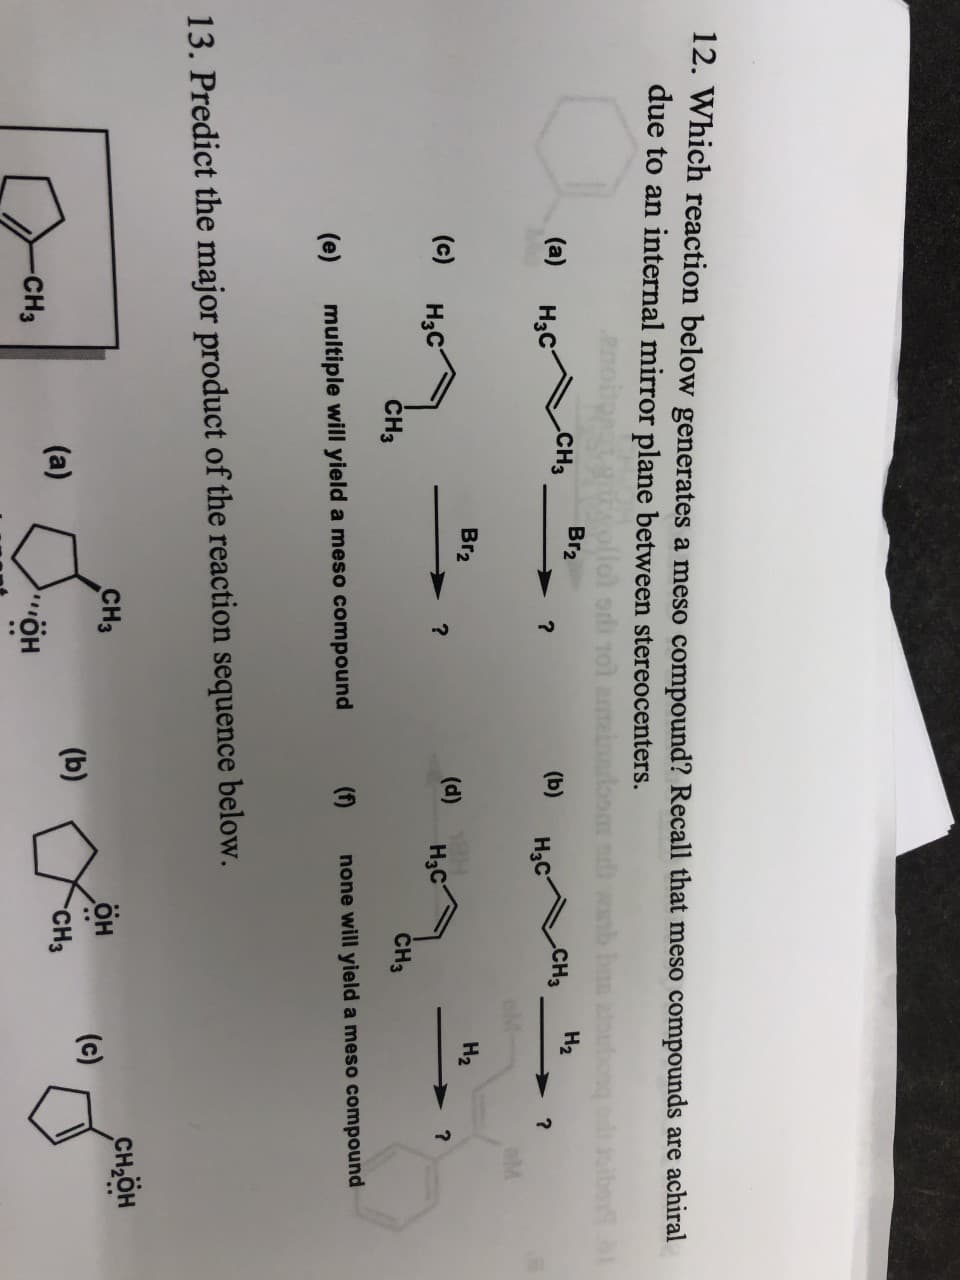 12. Which reaction below generates a meso compound? Recall that meso compounds are achiral
due to an internal mirror plane between stereocenters.
1ol a
oom owb b
Br2
На
(a)
Hас
.CH3
(b)
CHЗ
Нас
Br2
Hа
(c)
Hас
(d)
Hас
CHз
CH3
none will yield a meso compound
(e)
multiple will yield a meso compound
13. Predict the major product of the reaction sequence below.
сн-дн
CHз
он
(c)
(b)
(a)
-CH3
но..
